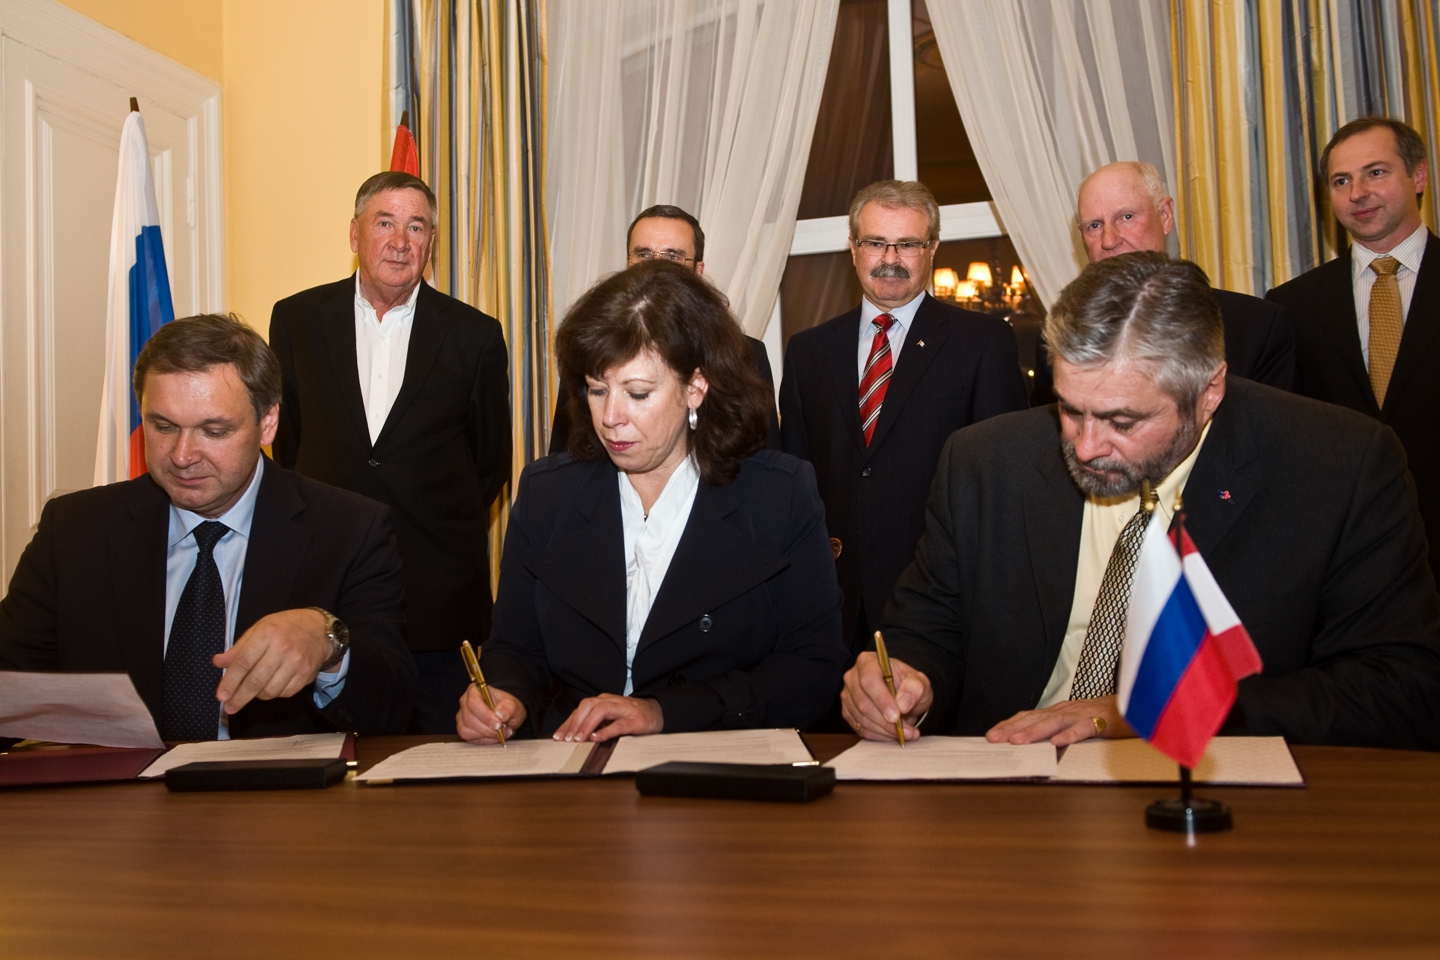 Government of Canada Ag. Mission with Minister Ritz, Moscow (October 2009)